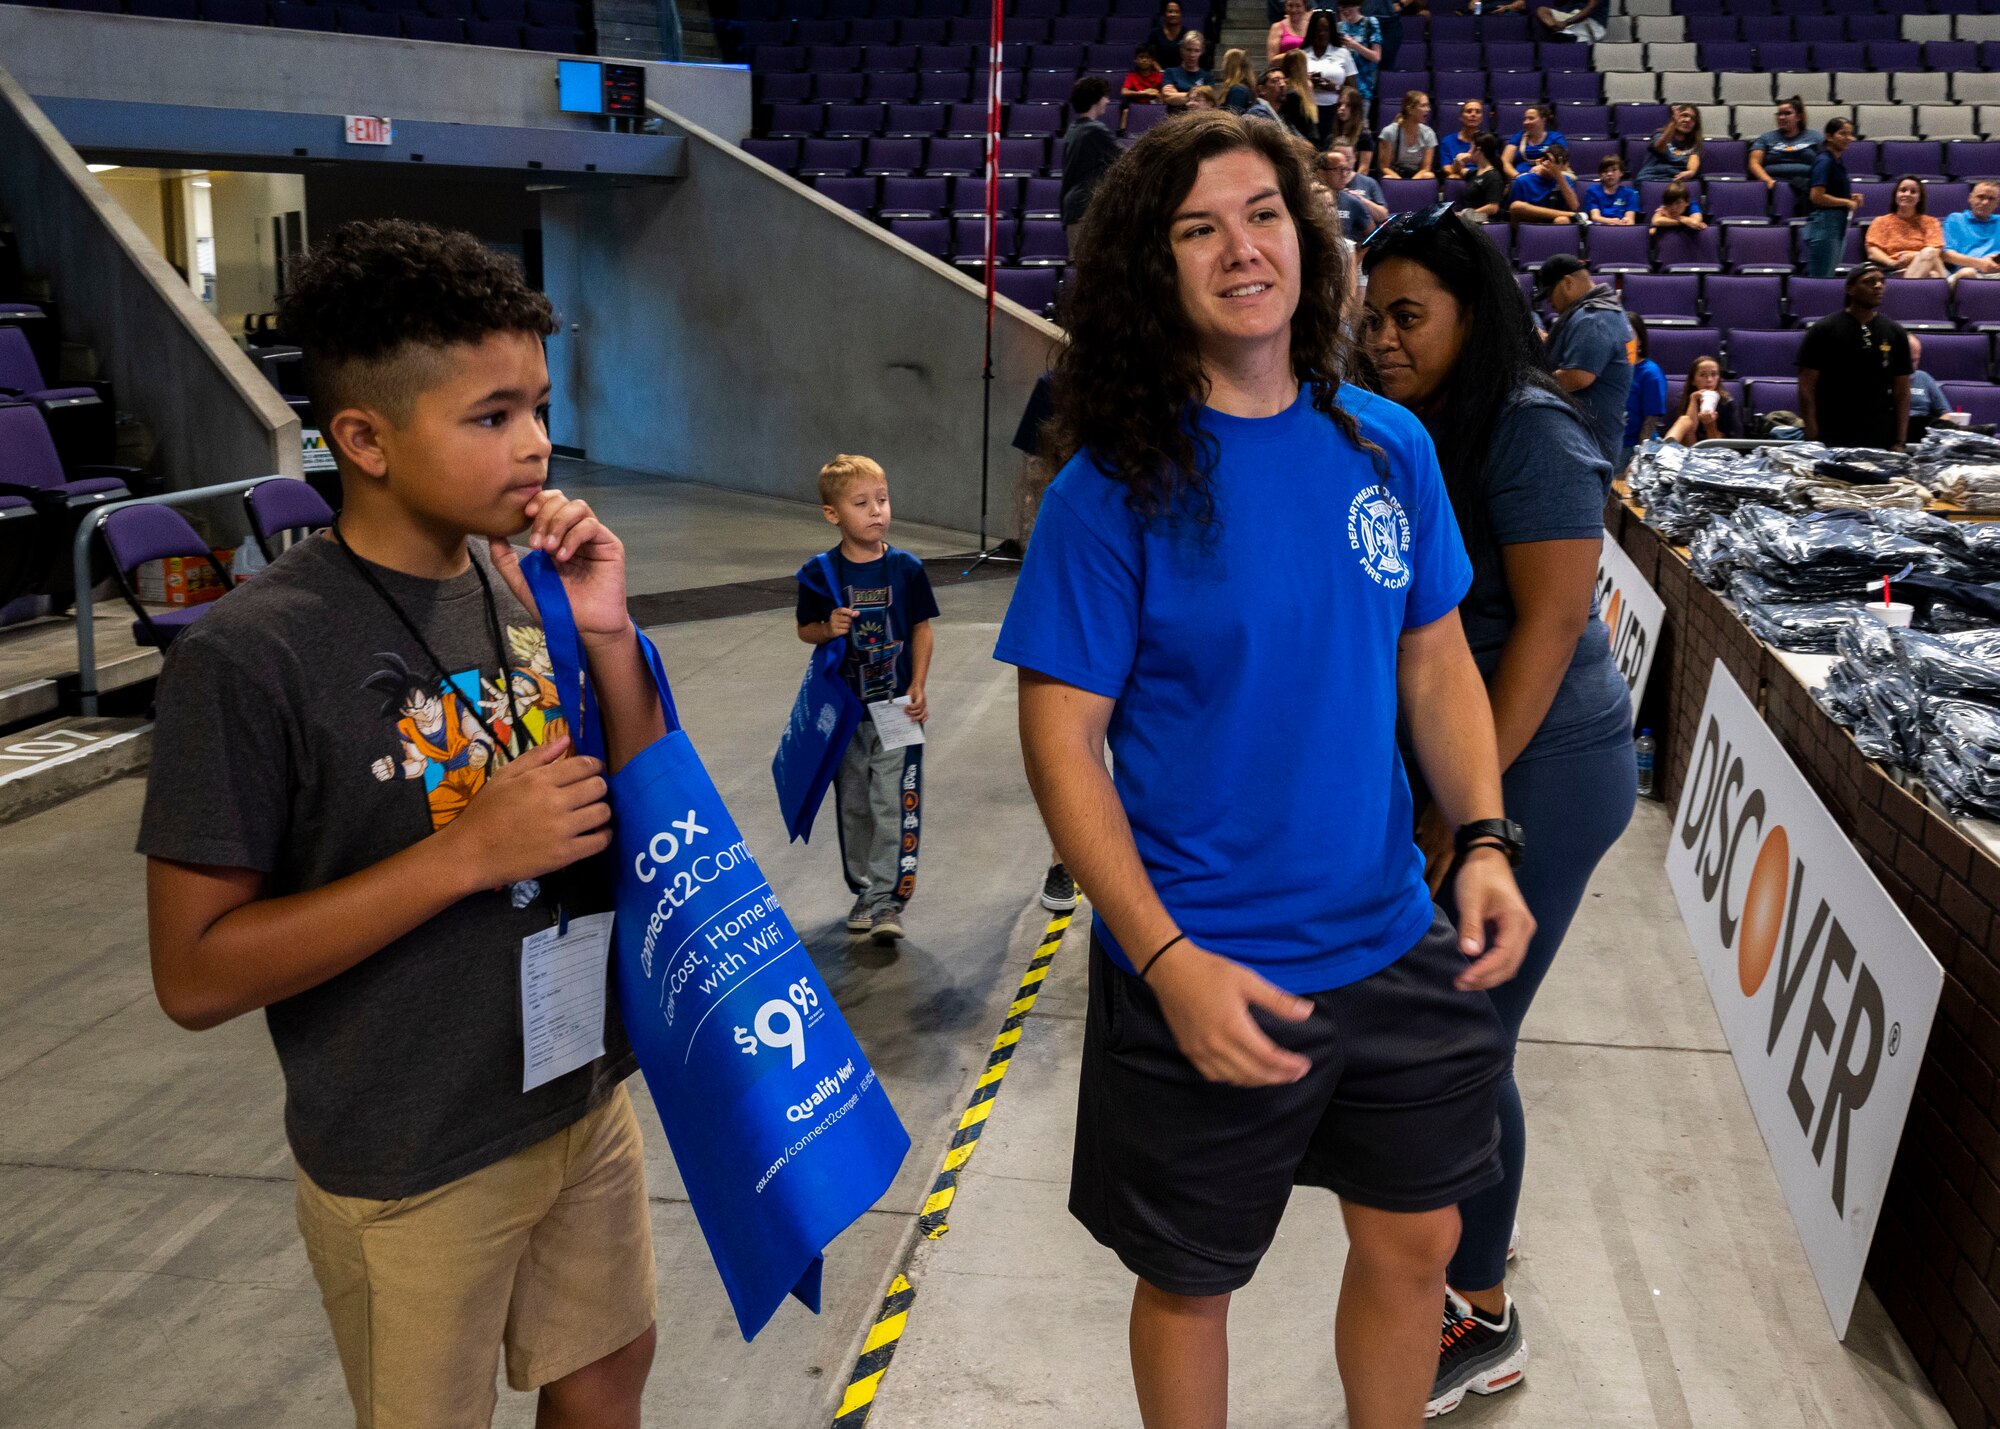 U.S. Air Force Airman 1st Class Rebekah Langley, 56th Civil Engineer Squadron fire protection, guides a student through the Back to School Bash event July 20, 2022, at Grand Canyon University, Phoenix, Arizona.